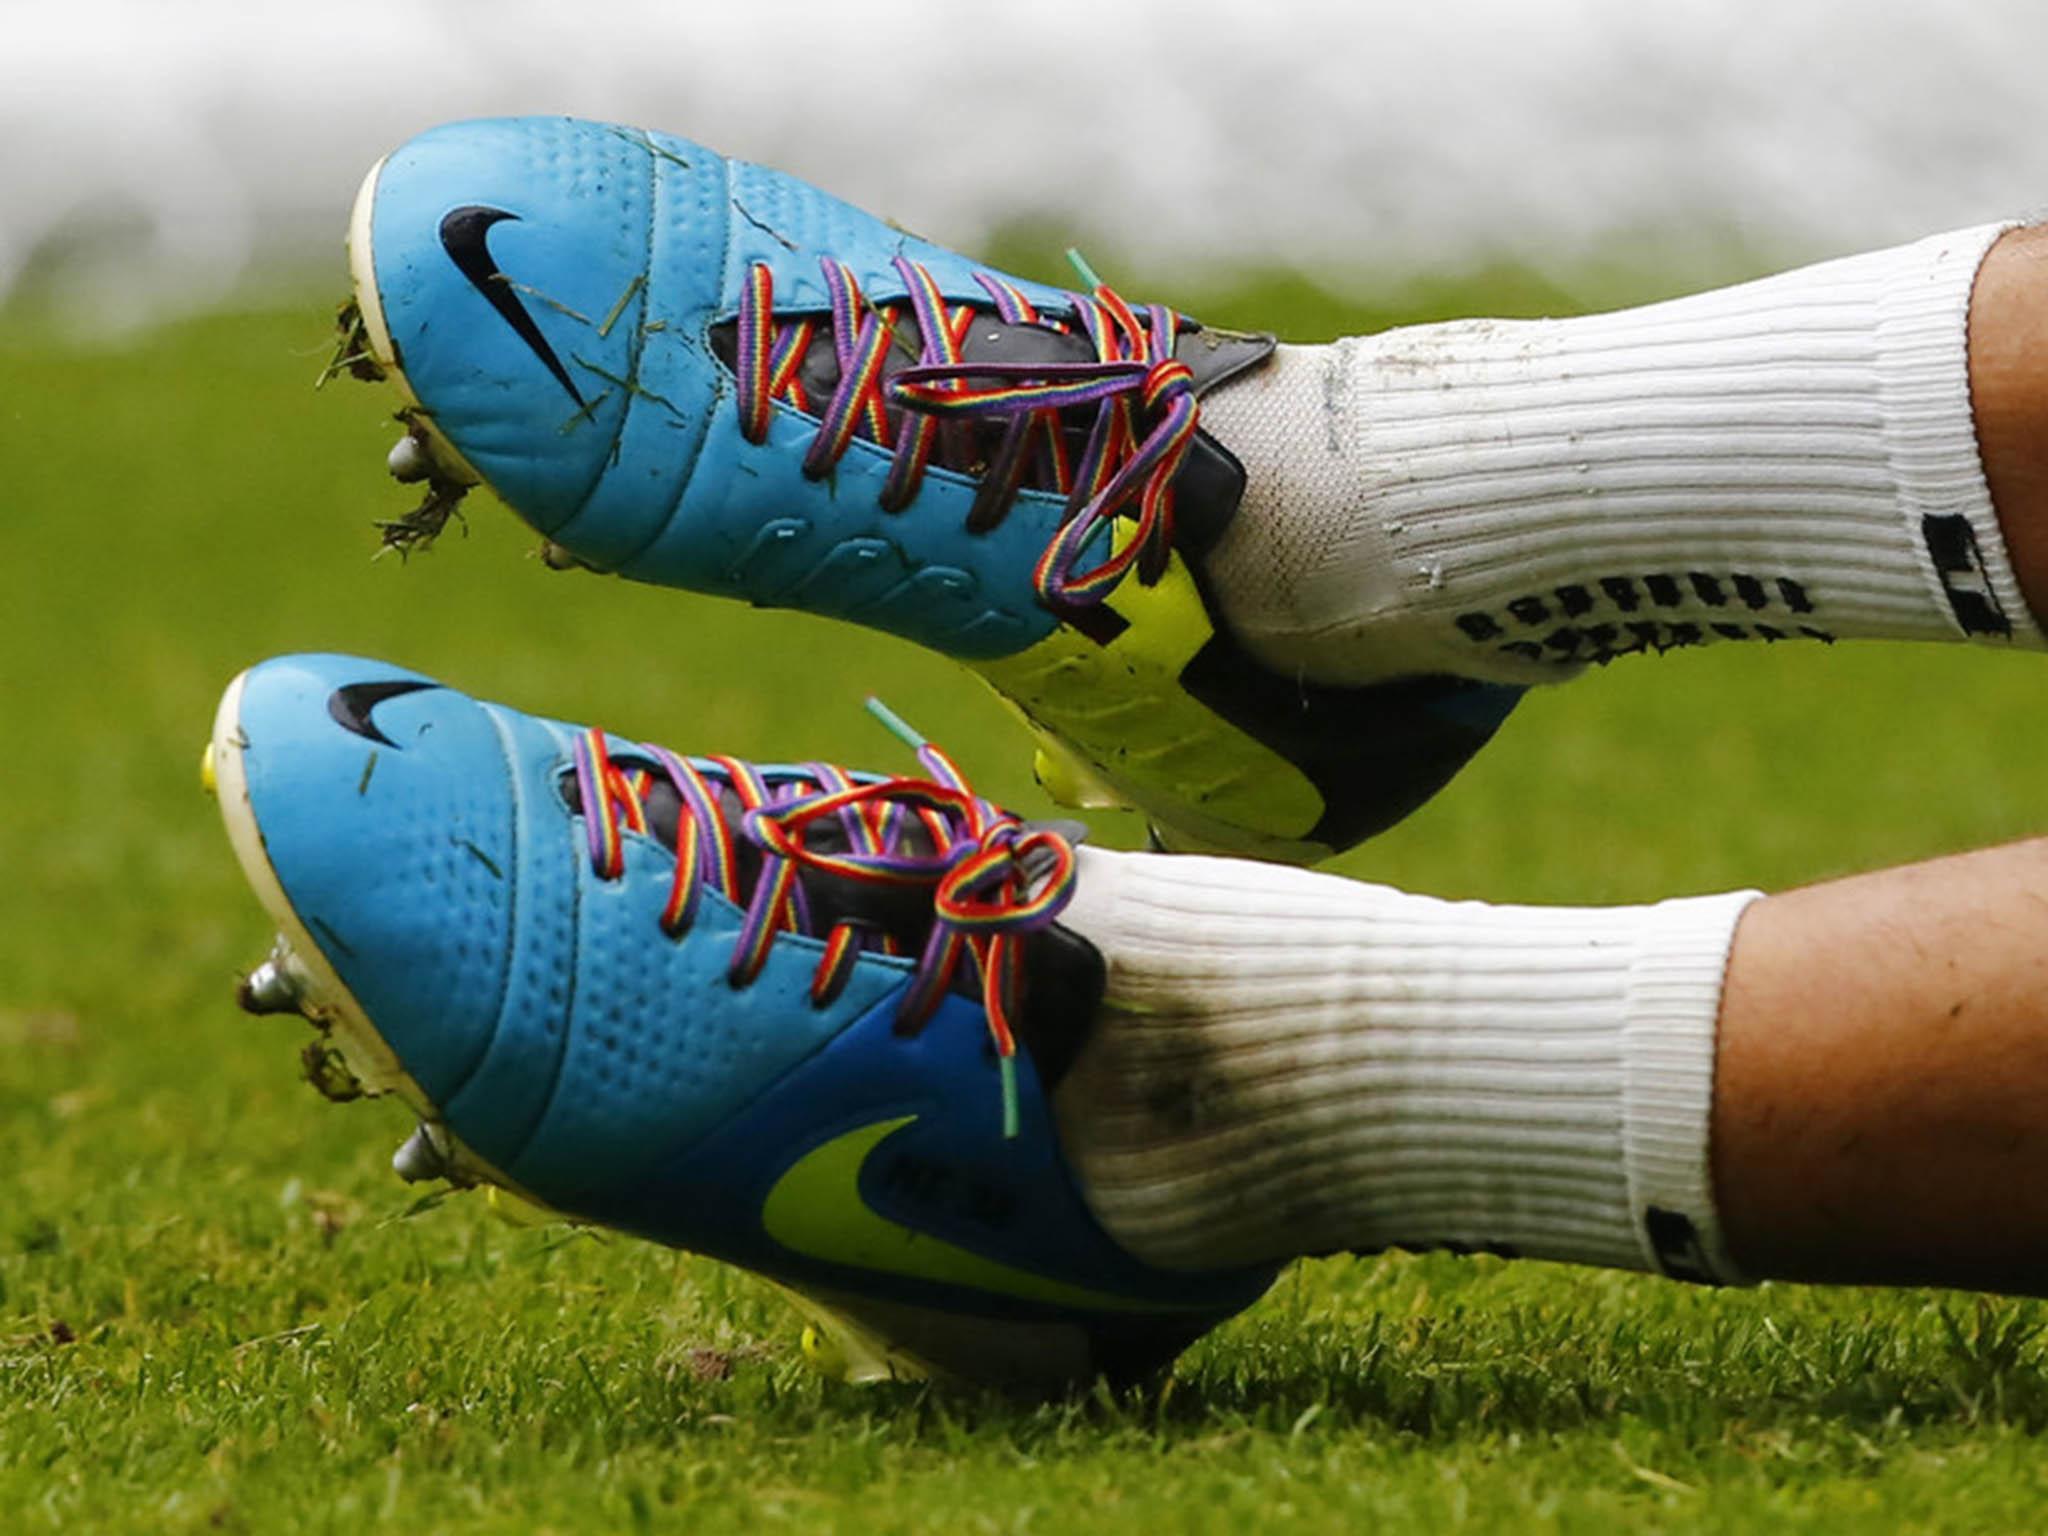 Stonewall has been encouraging footballers to wear rainbow laces to raise awareness of homophobia in the sport